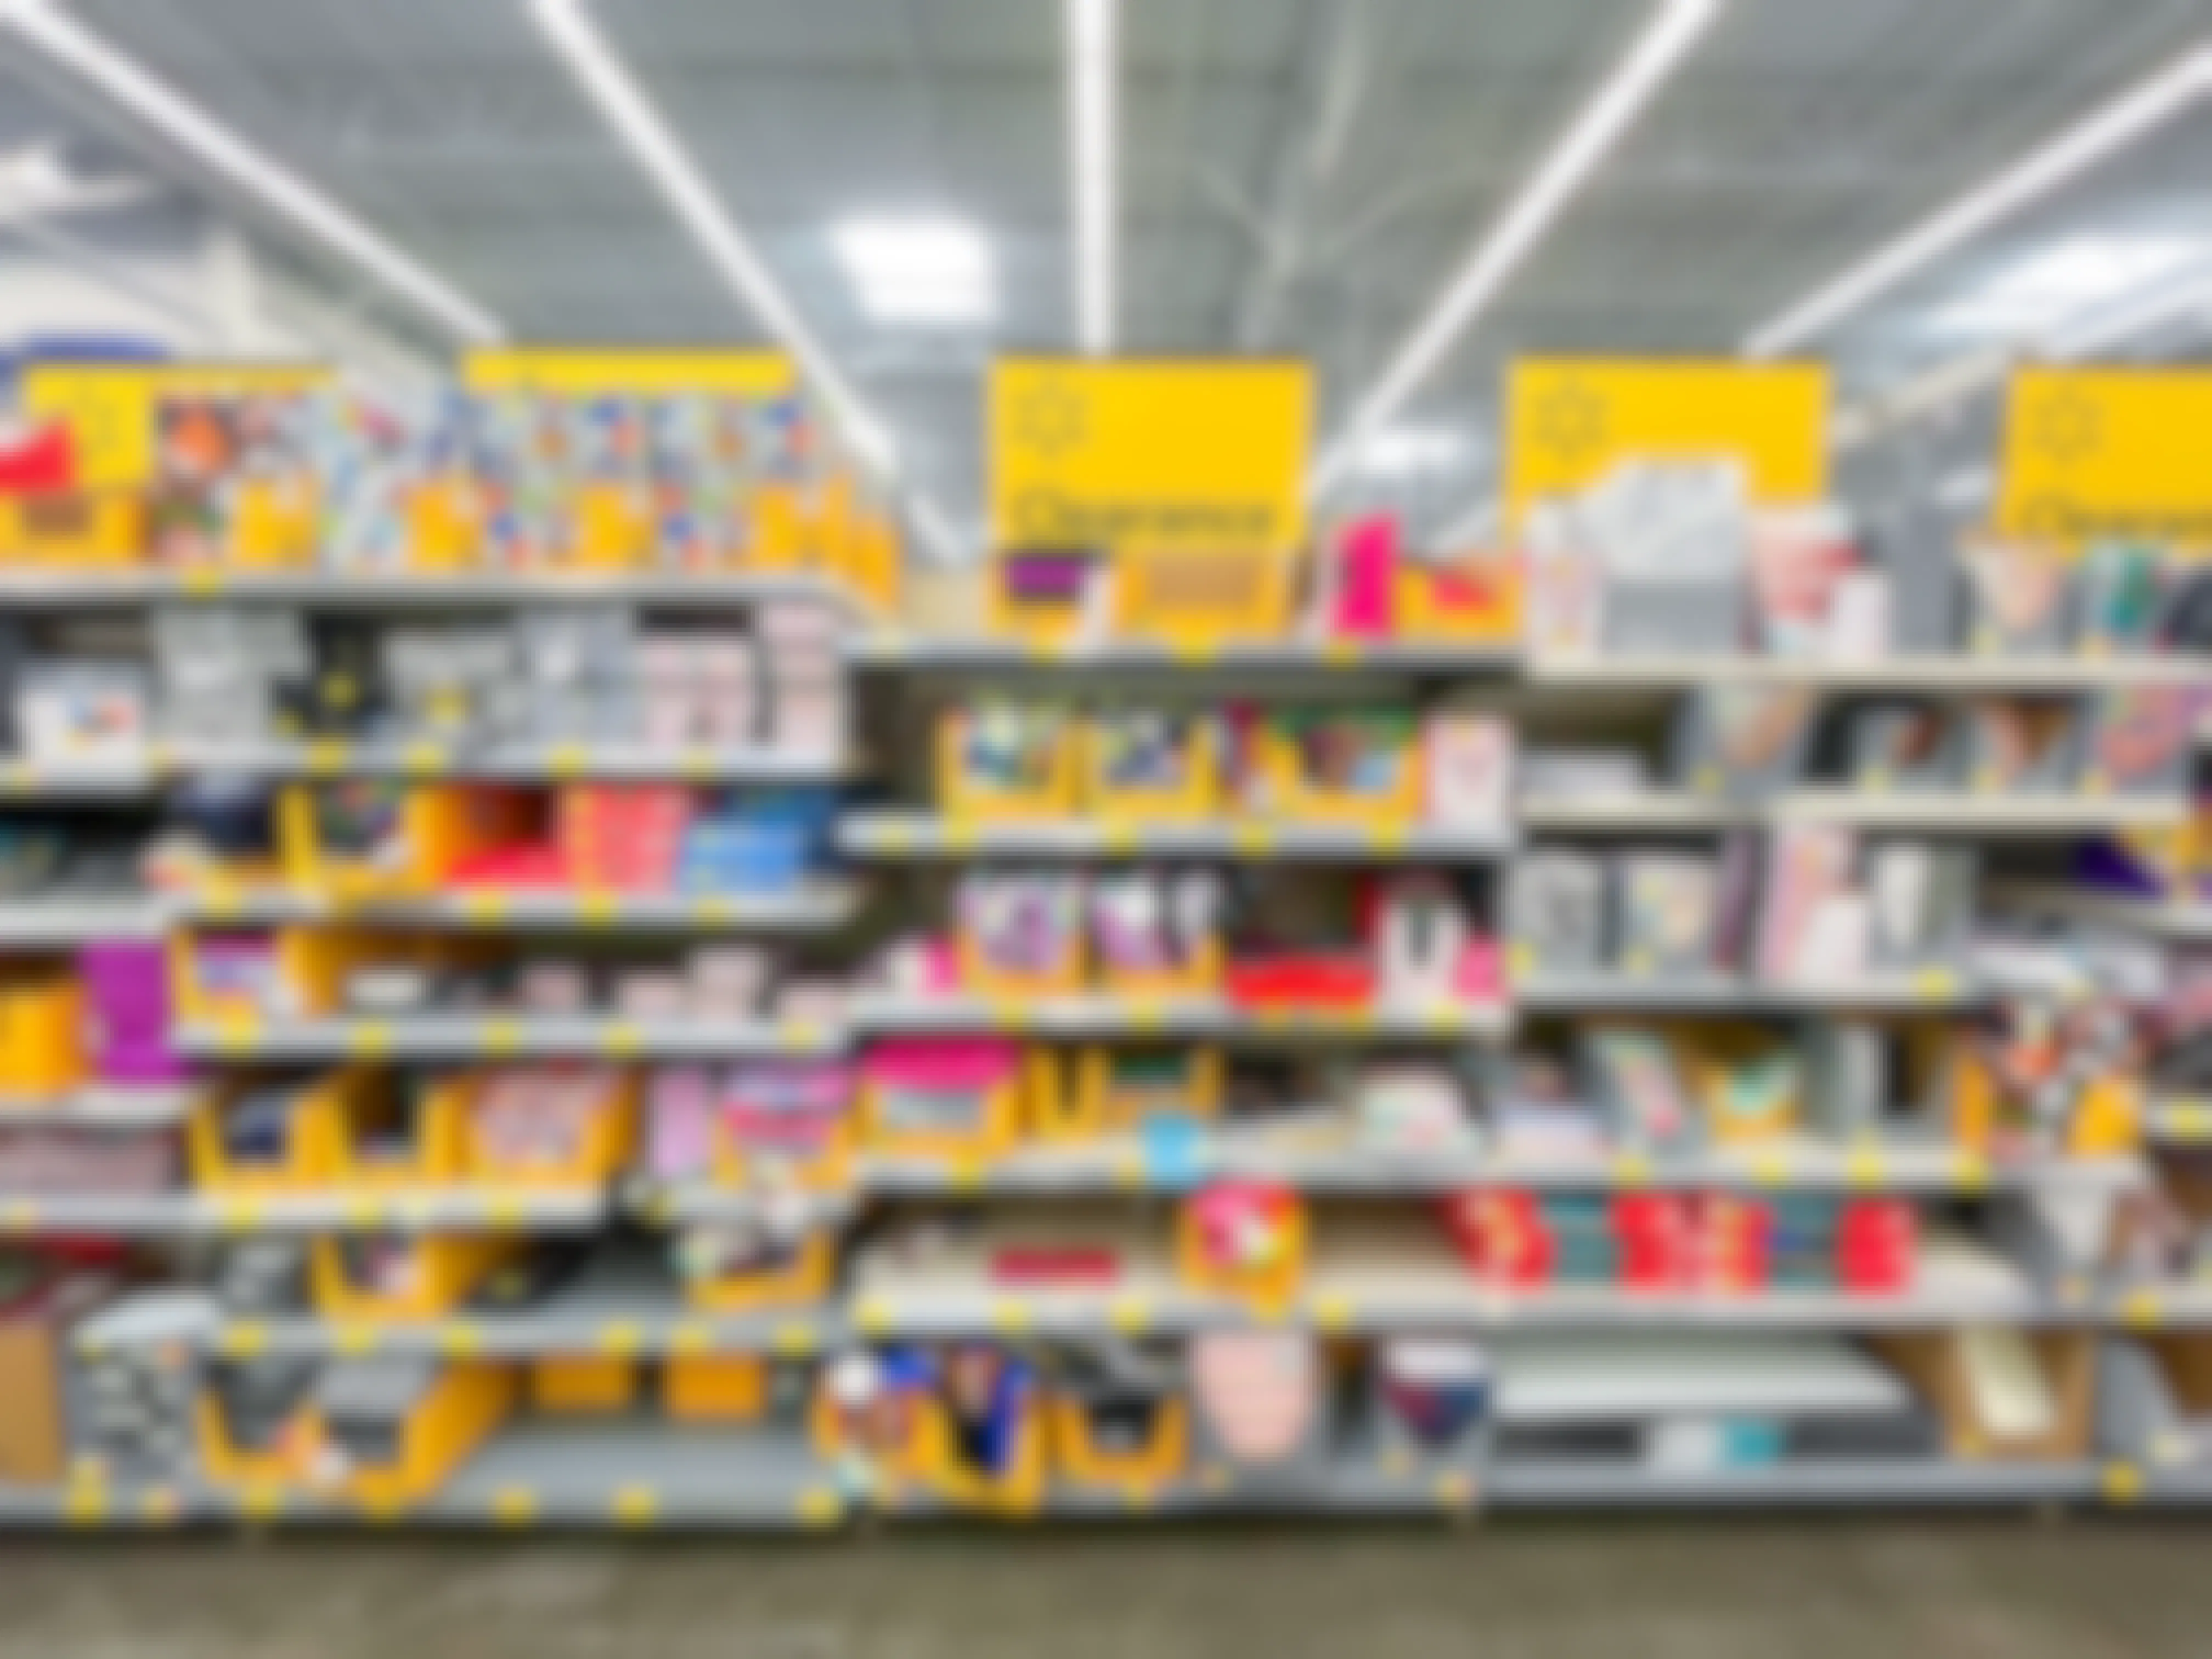 A walmart back-to-school clearance shelf filled with school supplies in store